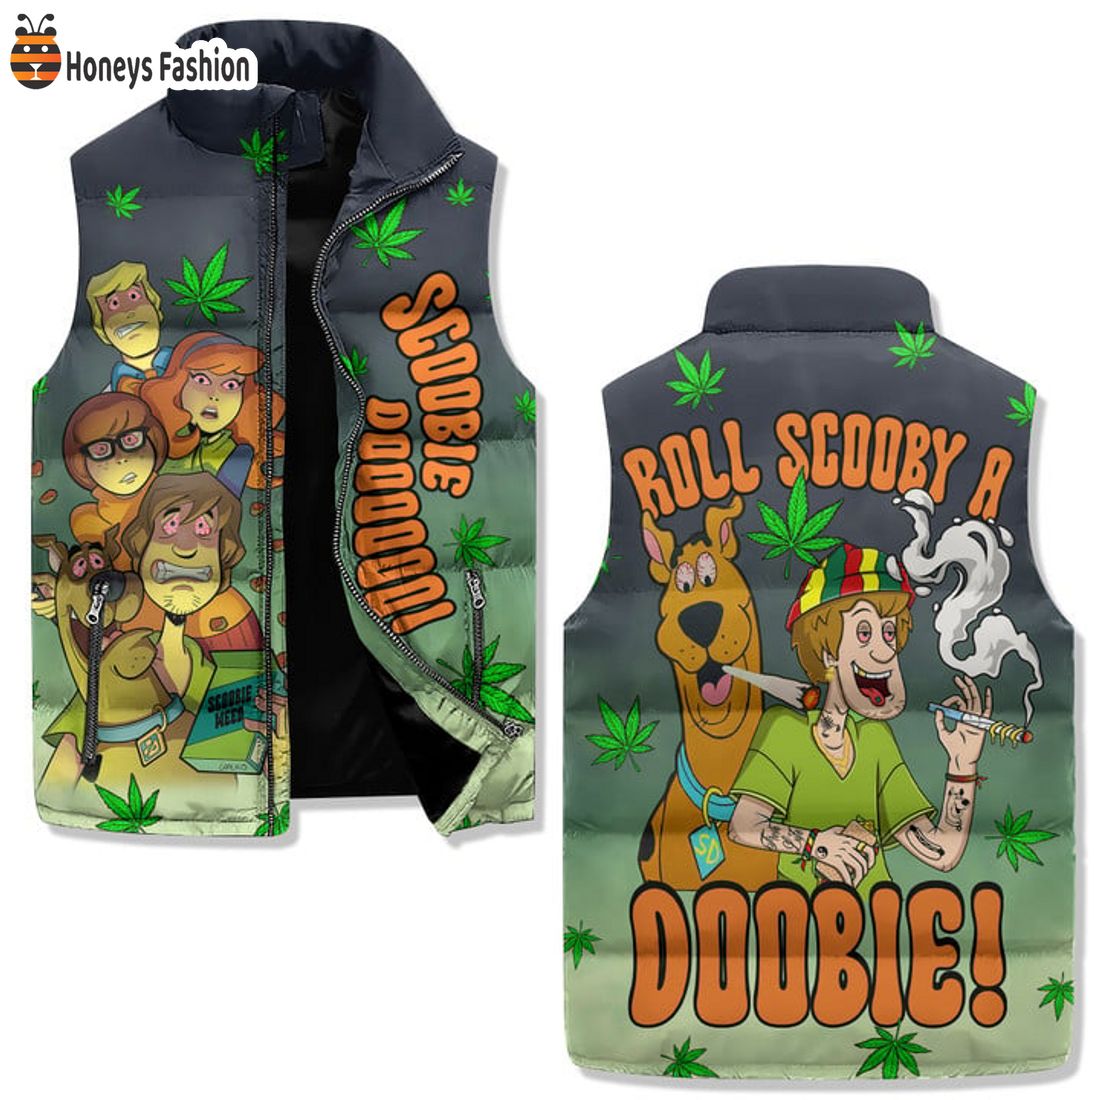 SELLER Scooby Doo Roll Scooby A Double Weed Puffer Sleeveless Jacket